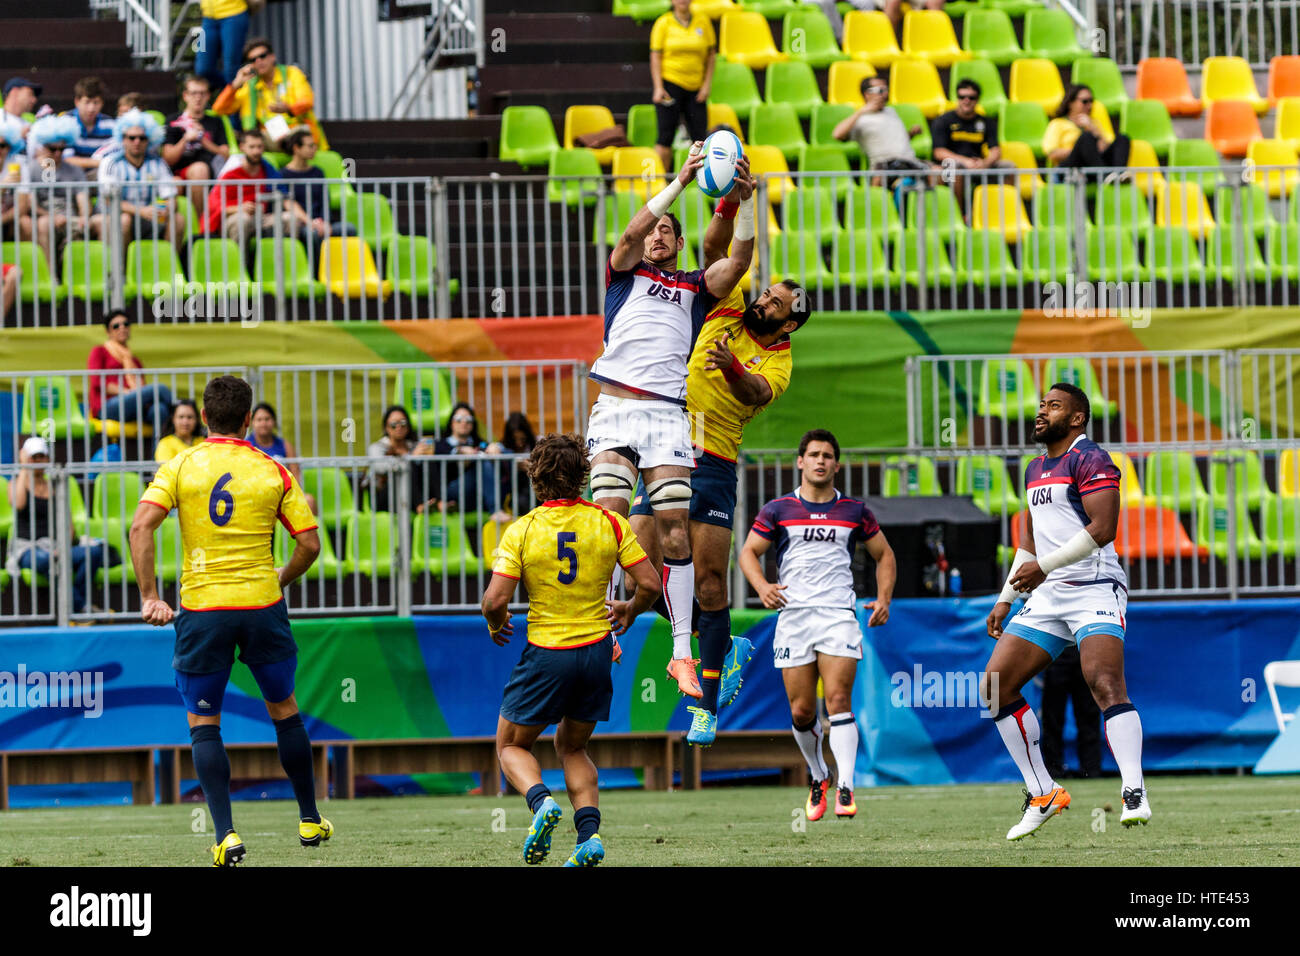 Rio de Janeiro, Brazil. 11 August 2016 Zack Test (USA) and Ignacio Martin (ESP) reach for the ball in the Men's  Rugby Sevens at the 2016 Olympic Summ Stock Photo